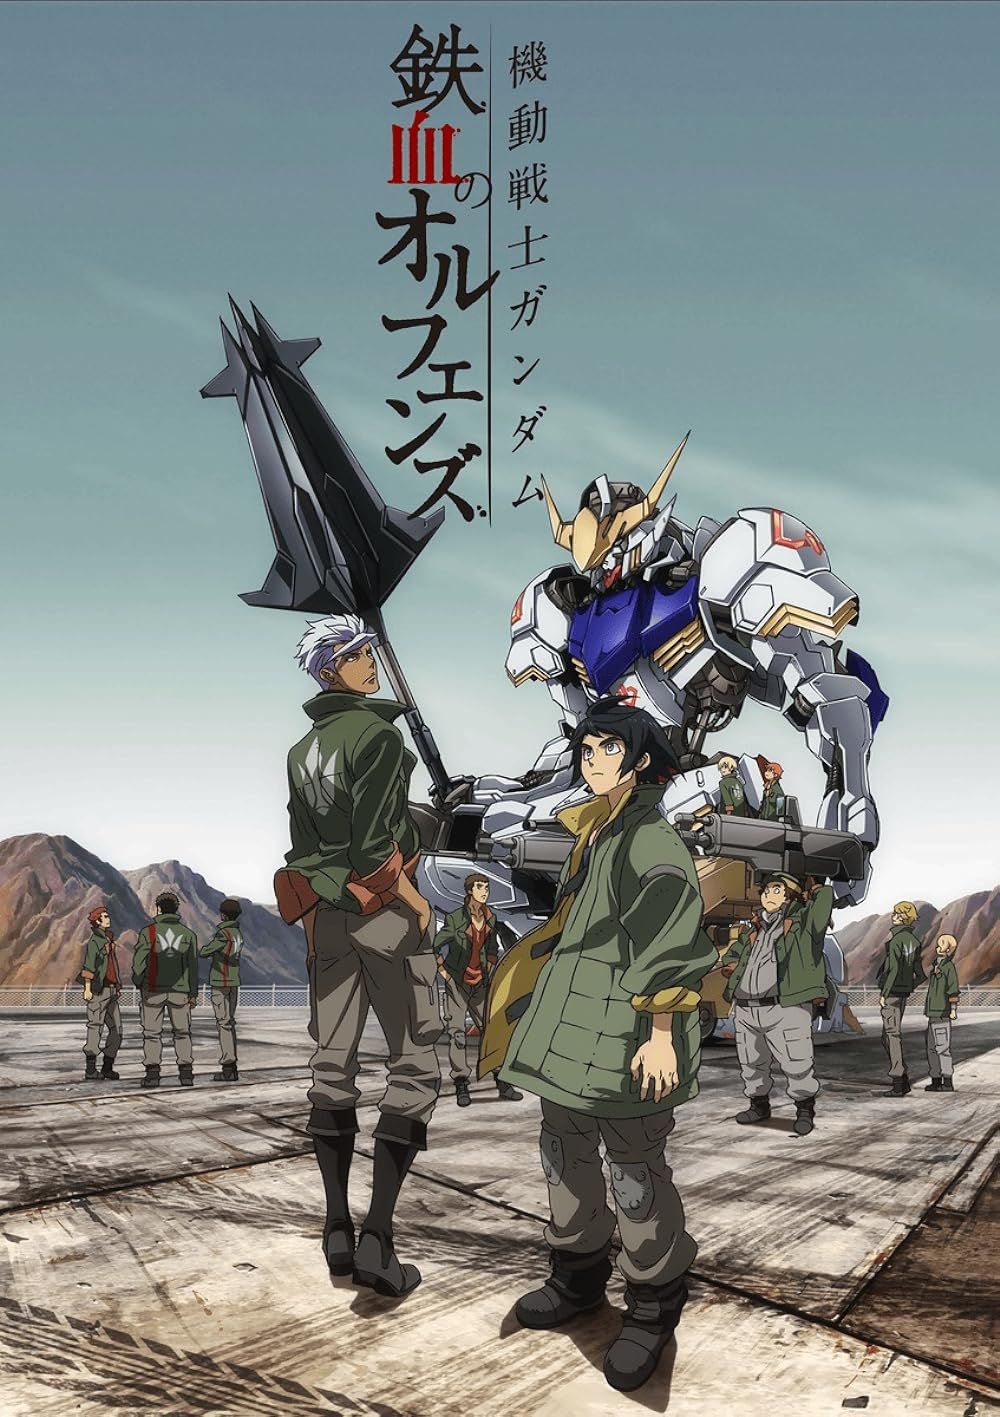 The cast standing near a mech in Mobile Suit Gundam: Iron Blooded Orphans official poster